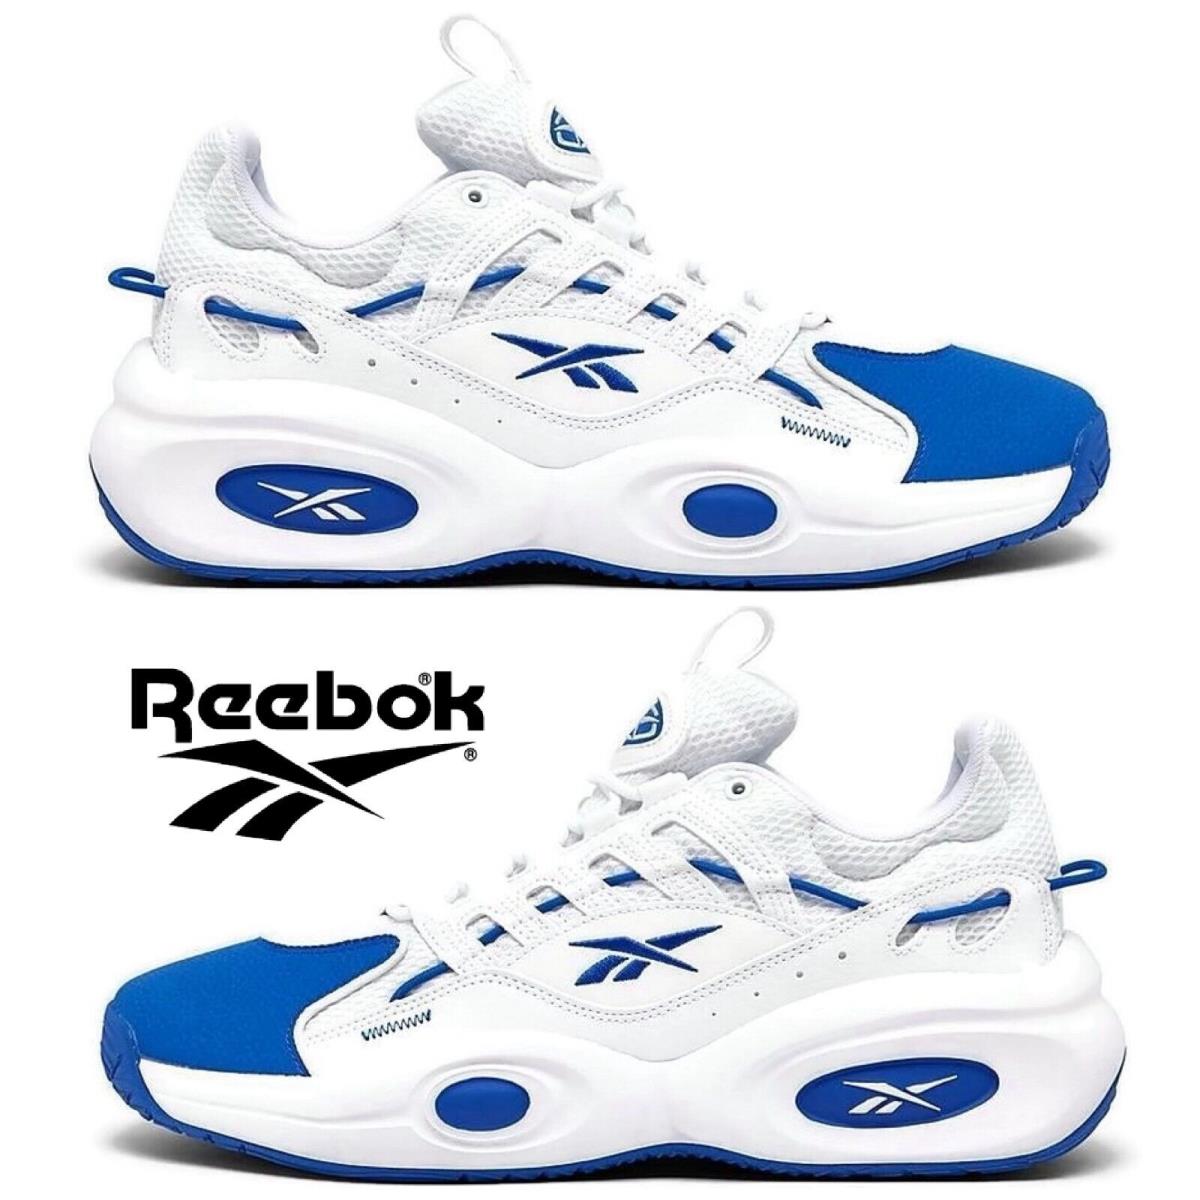 Reebok Solution Mid Basketball Shoes Men`s Sneakers Running Casual Sport White - Black, Manufacturer: